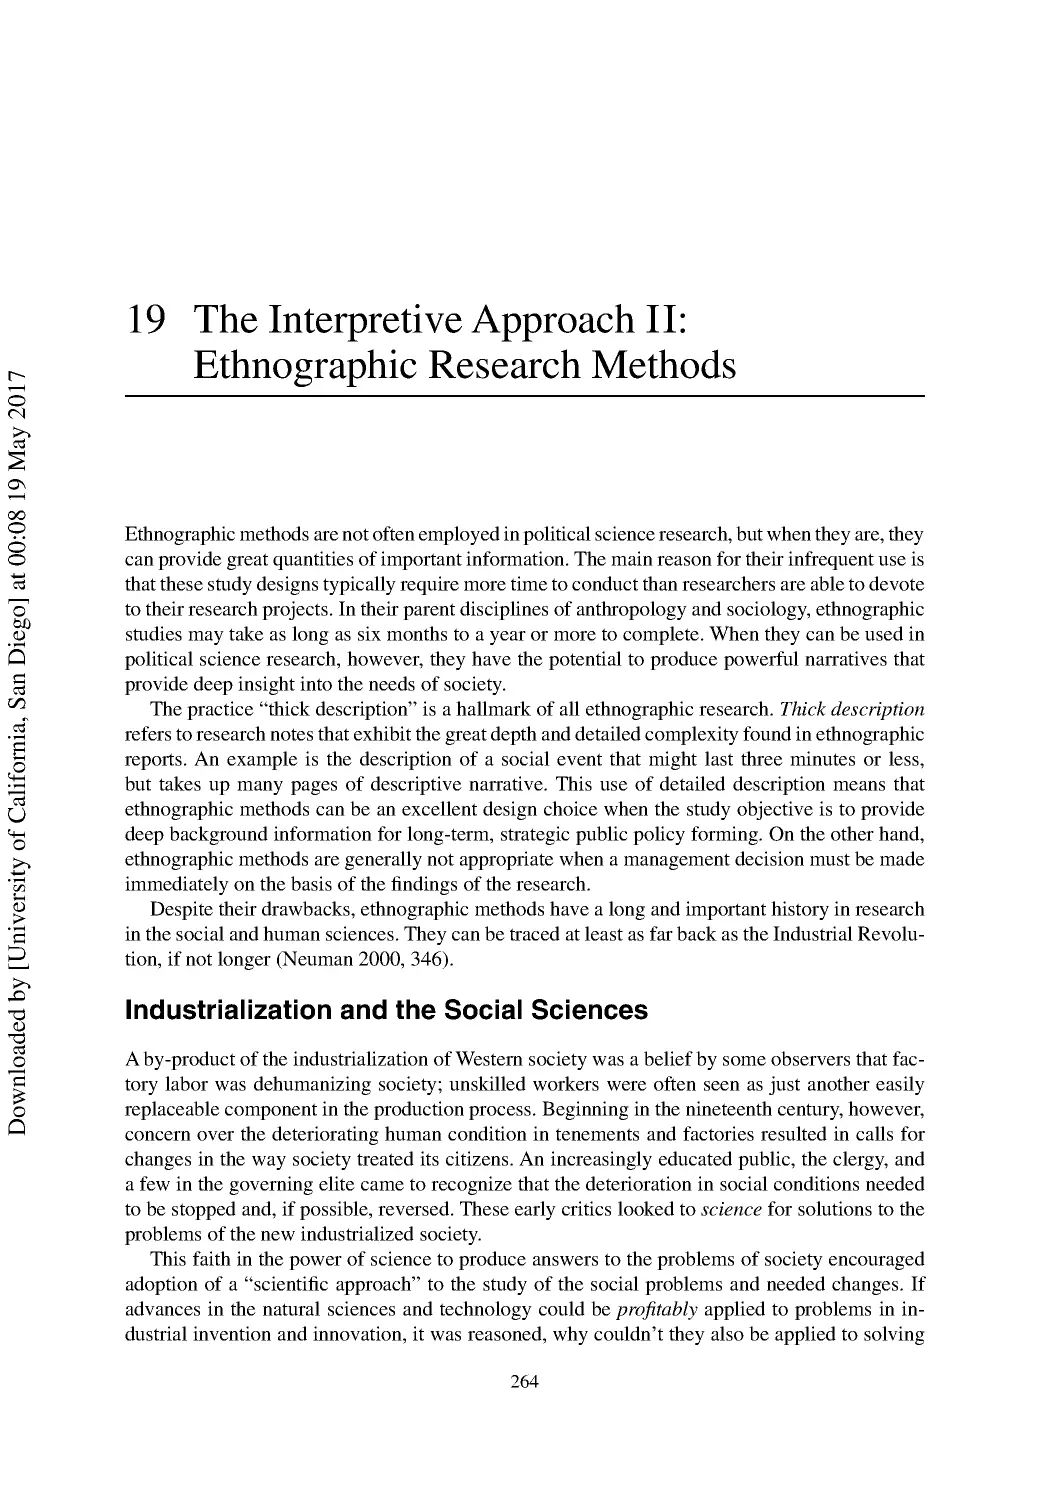 19 The Interpretive Approach II: Ethnographic Research Methods